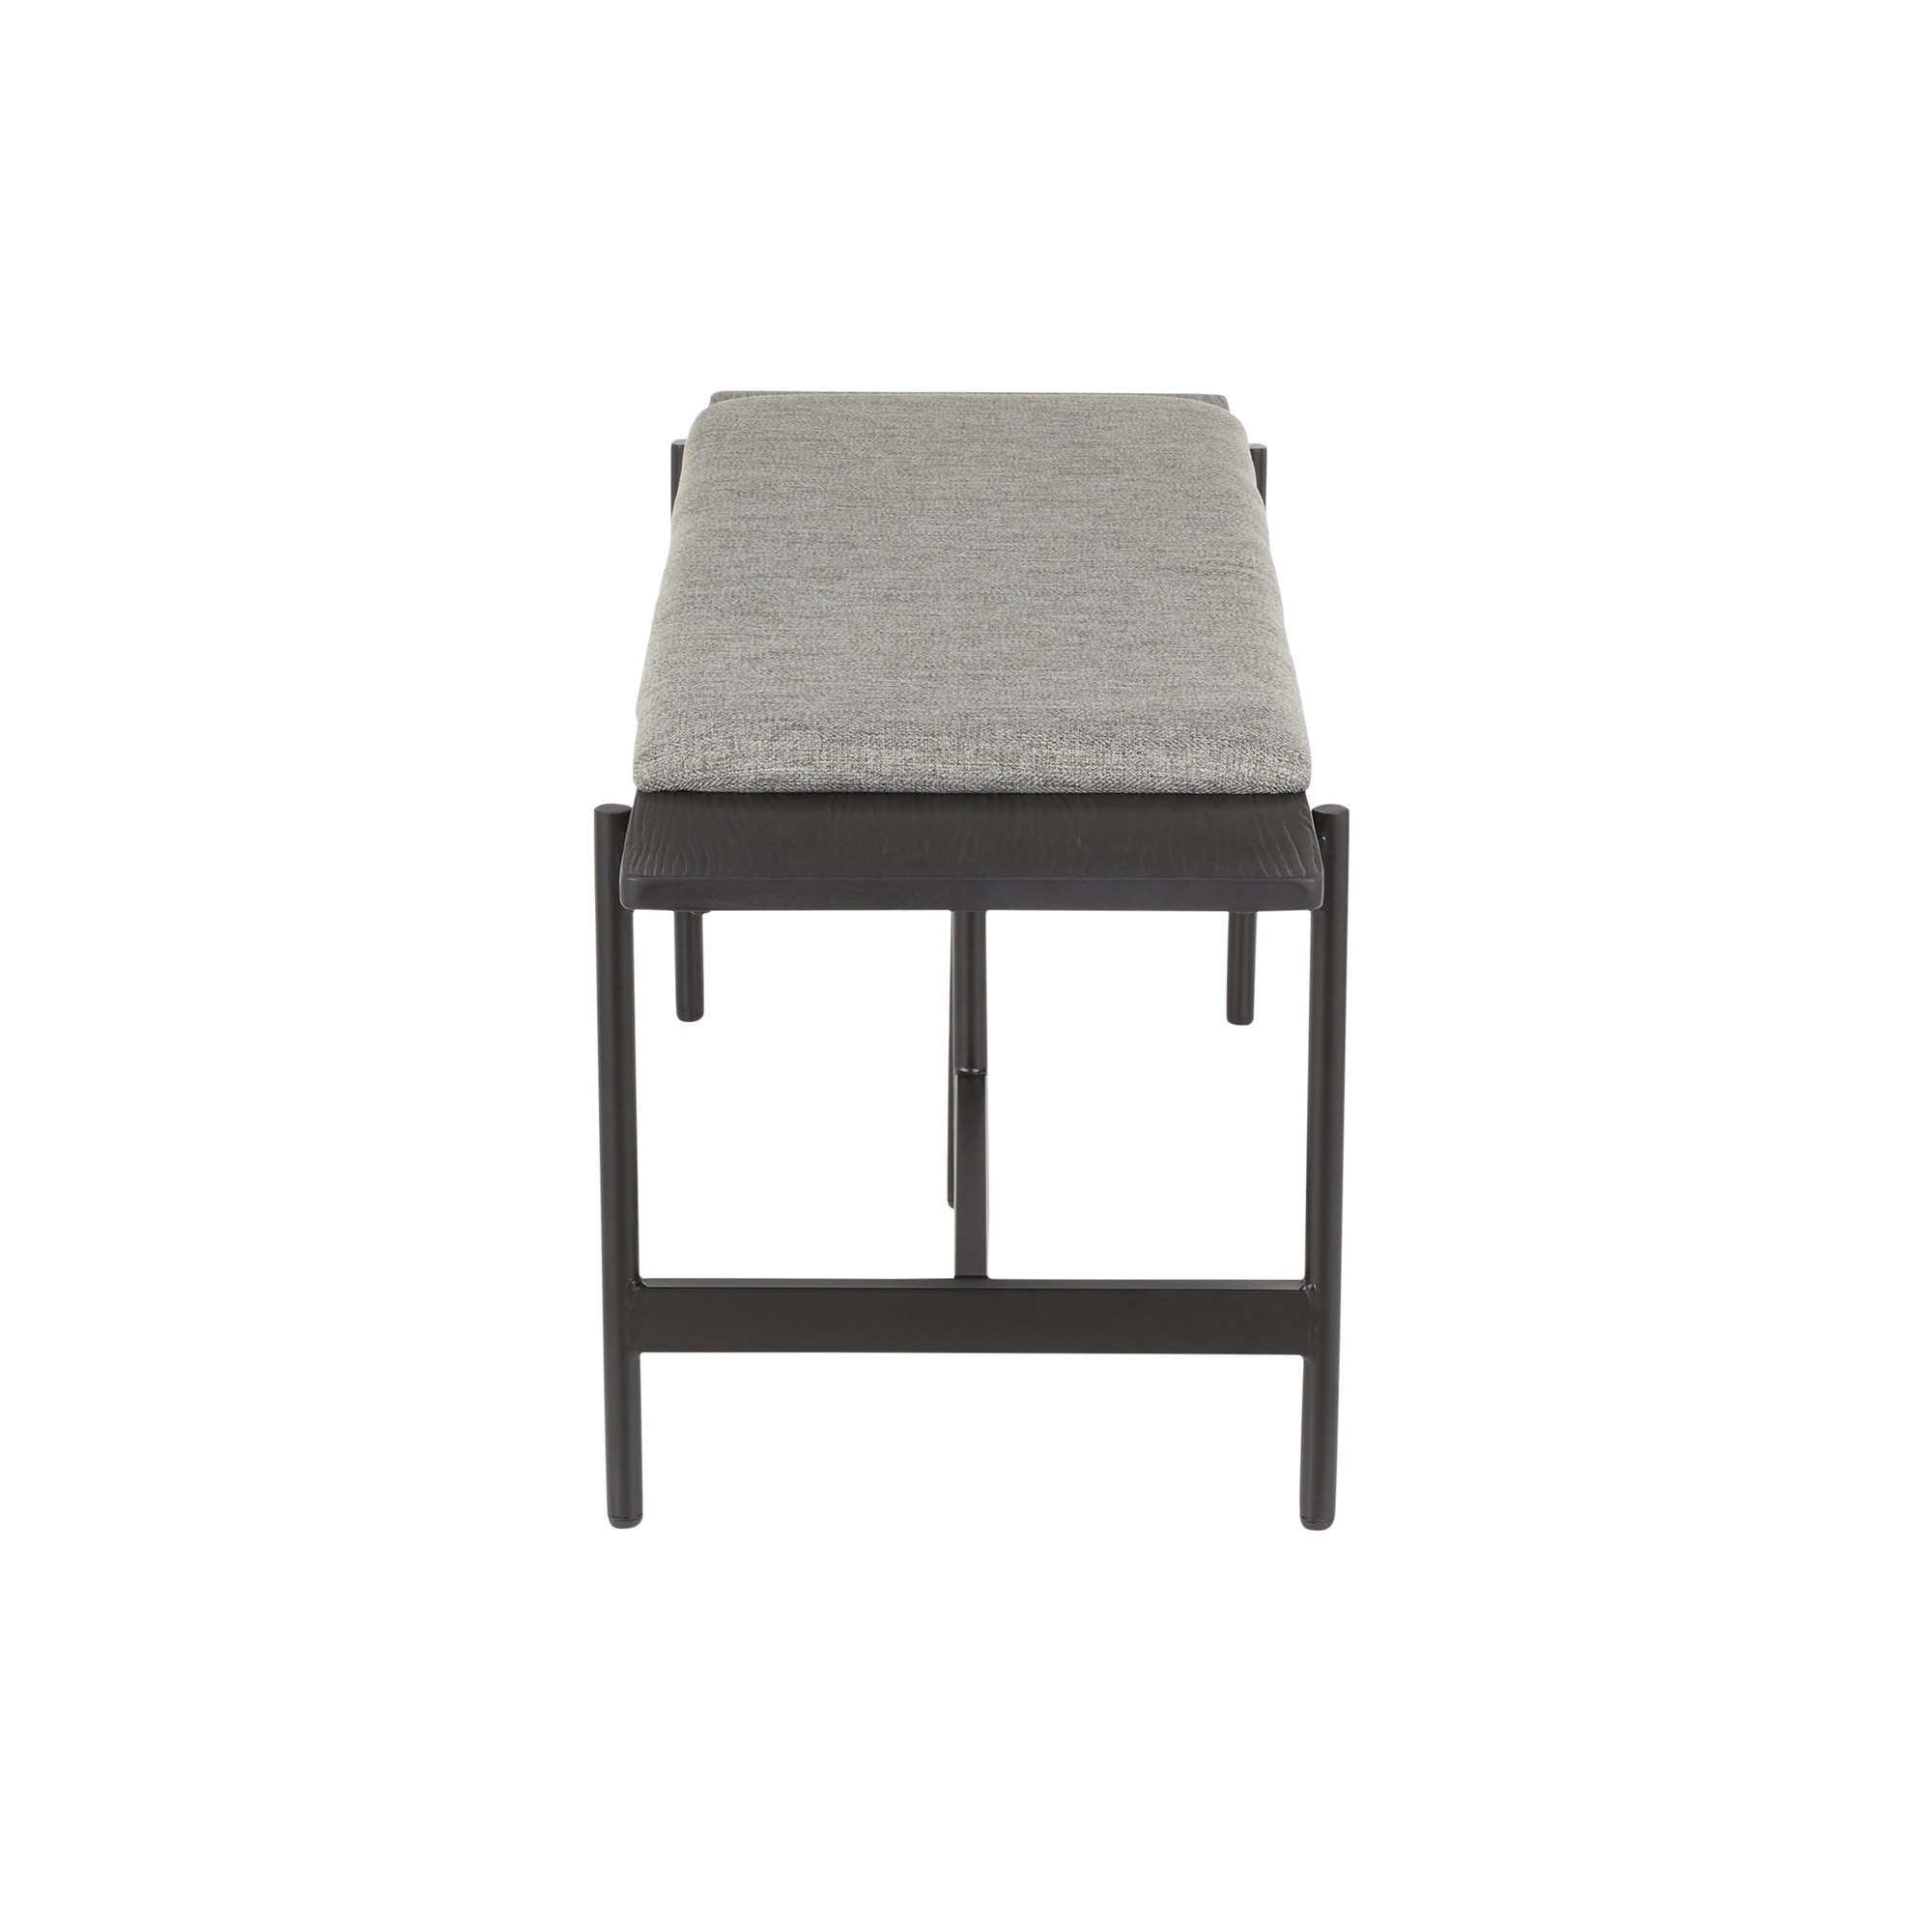 Chloe Contemporary Bench in Black Metal and Grey Fabric with Black Wood Accents by LumiSource - image 2 of 6